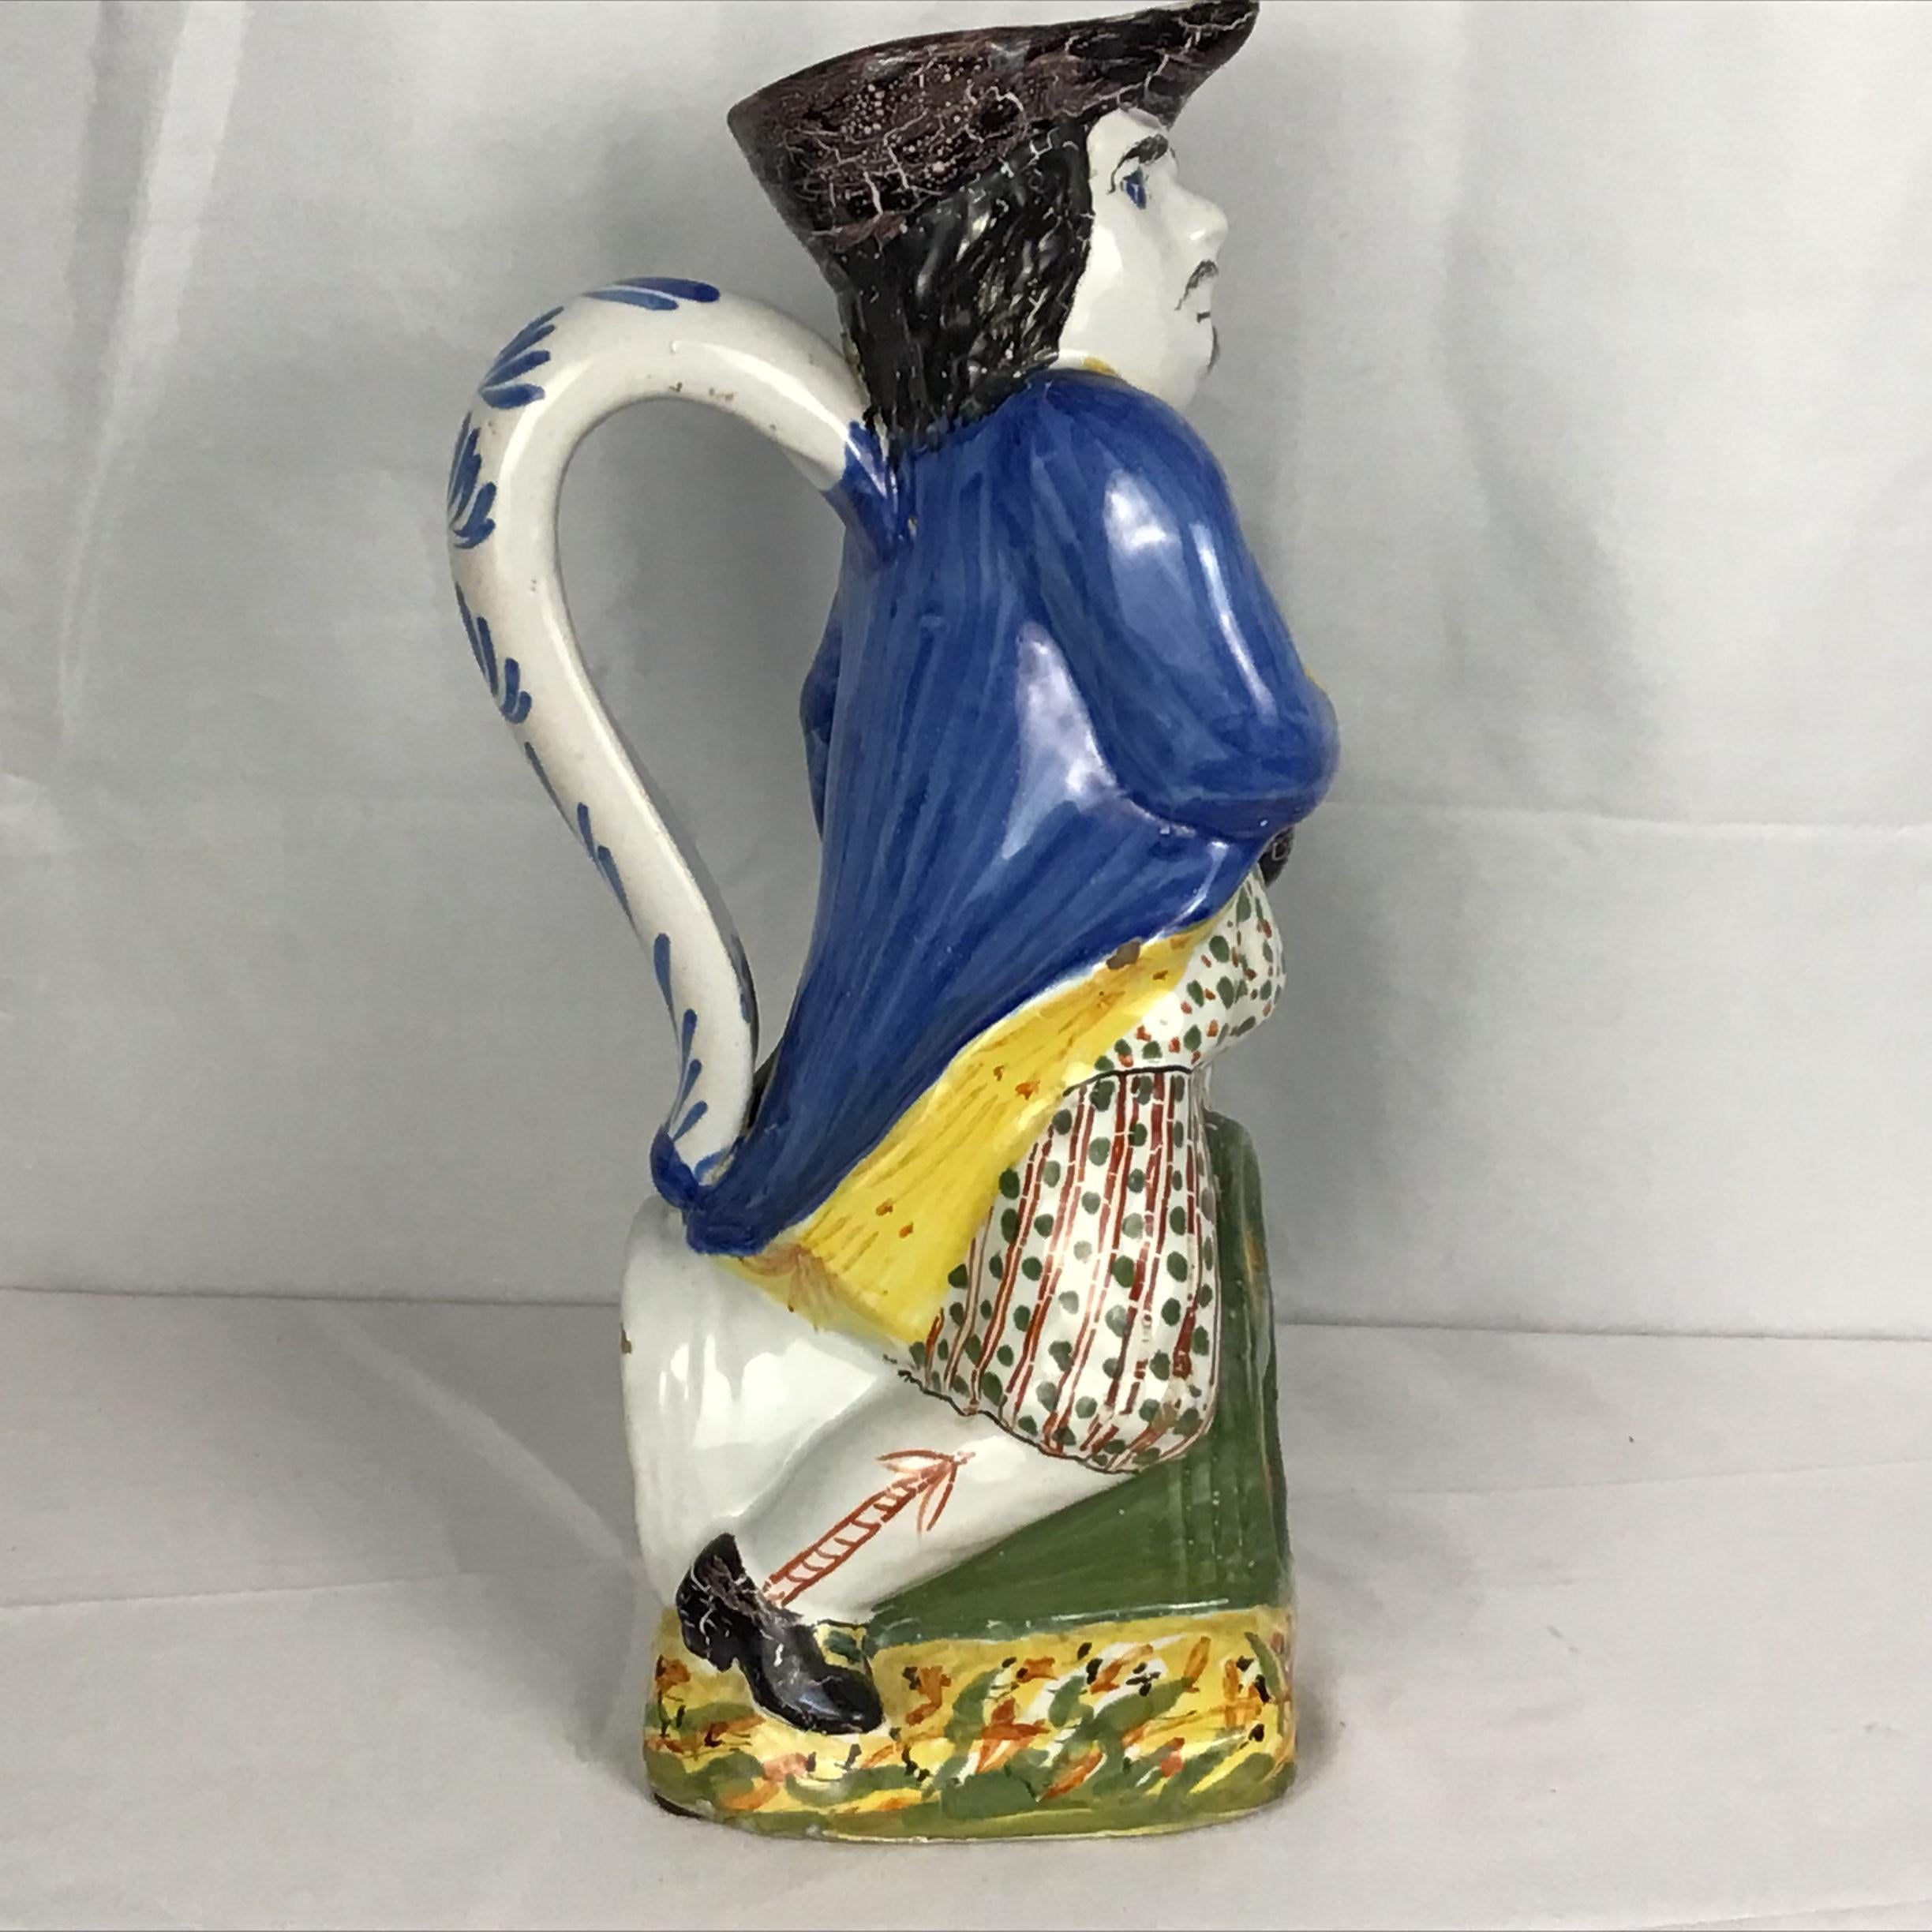 Pottery English Staffordshire Ceramic Toby Jug Figure For Sale